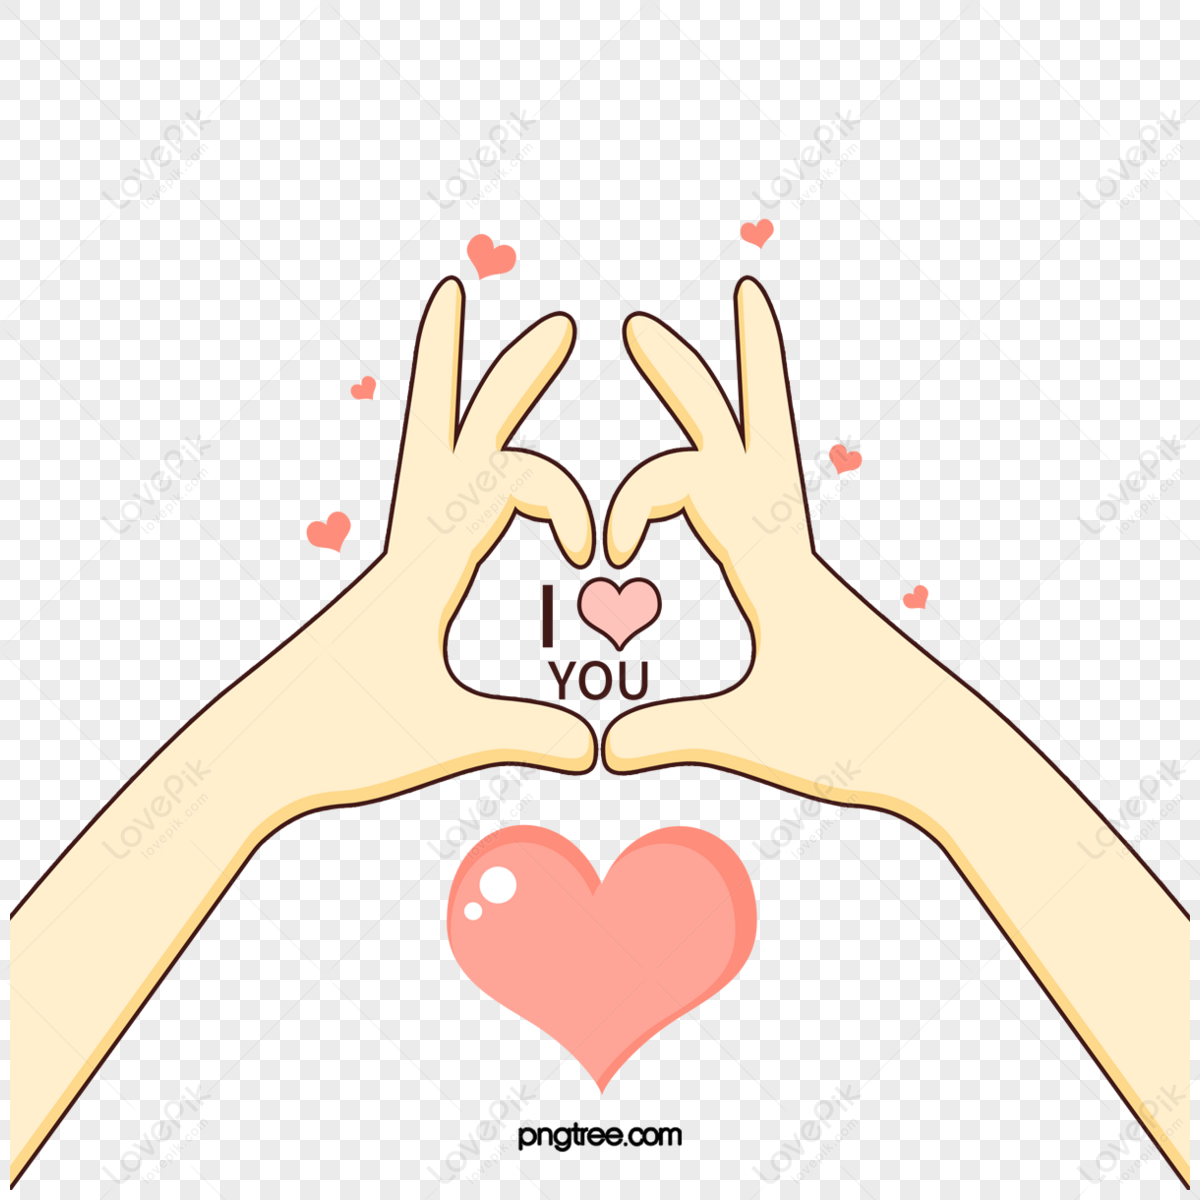 S, i love you hand sign, png | PNGEgg